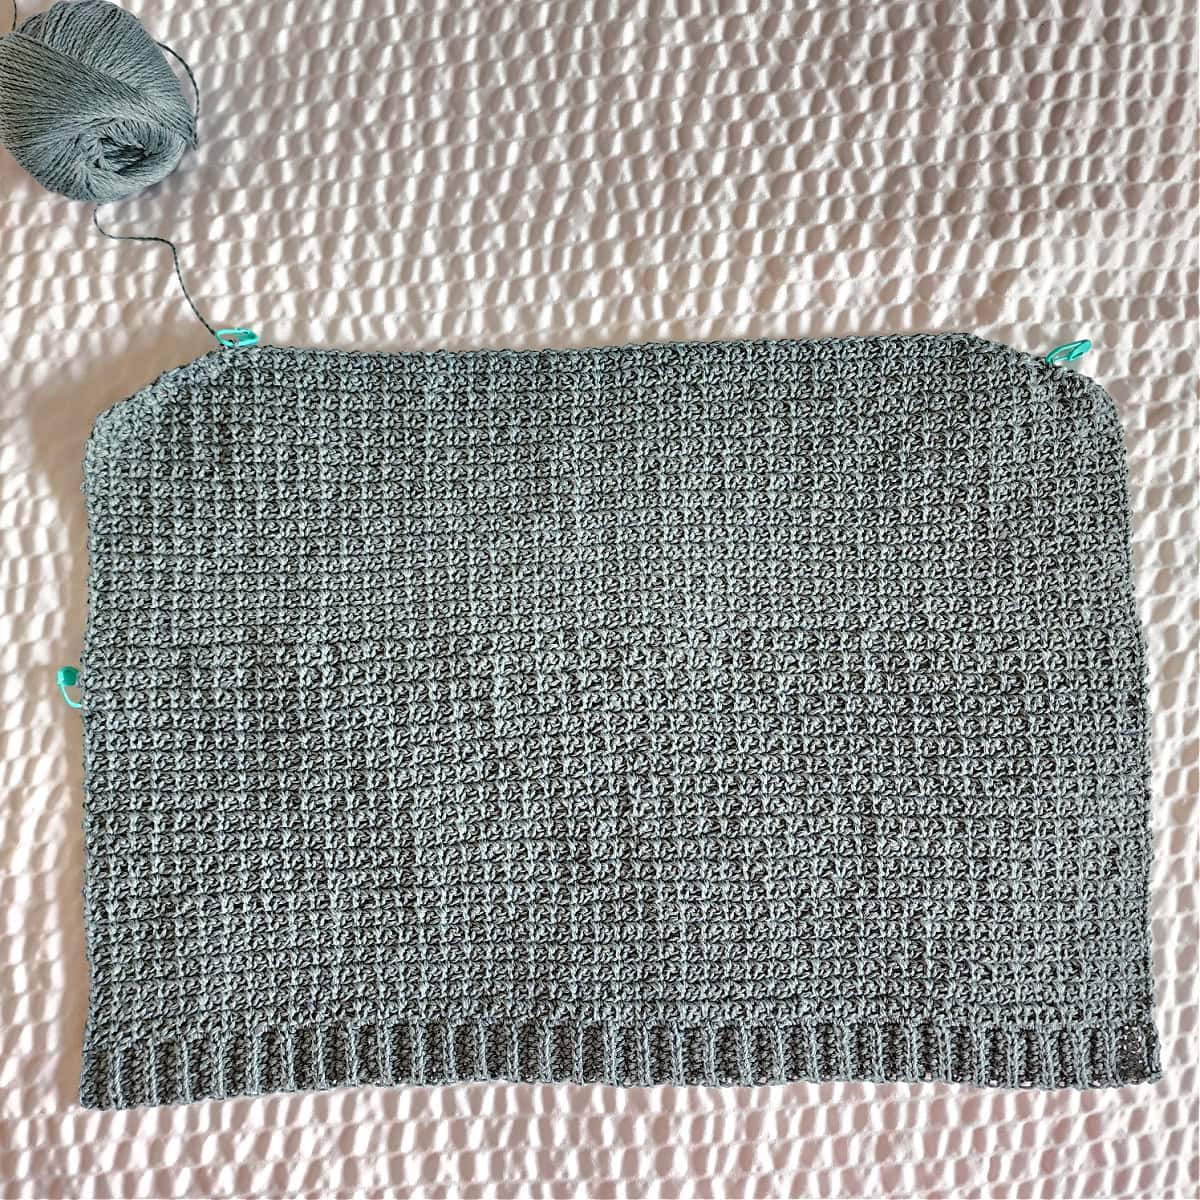 Armhole shaping on a panel of the summer crochet top.